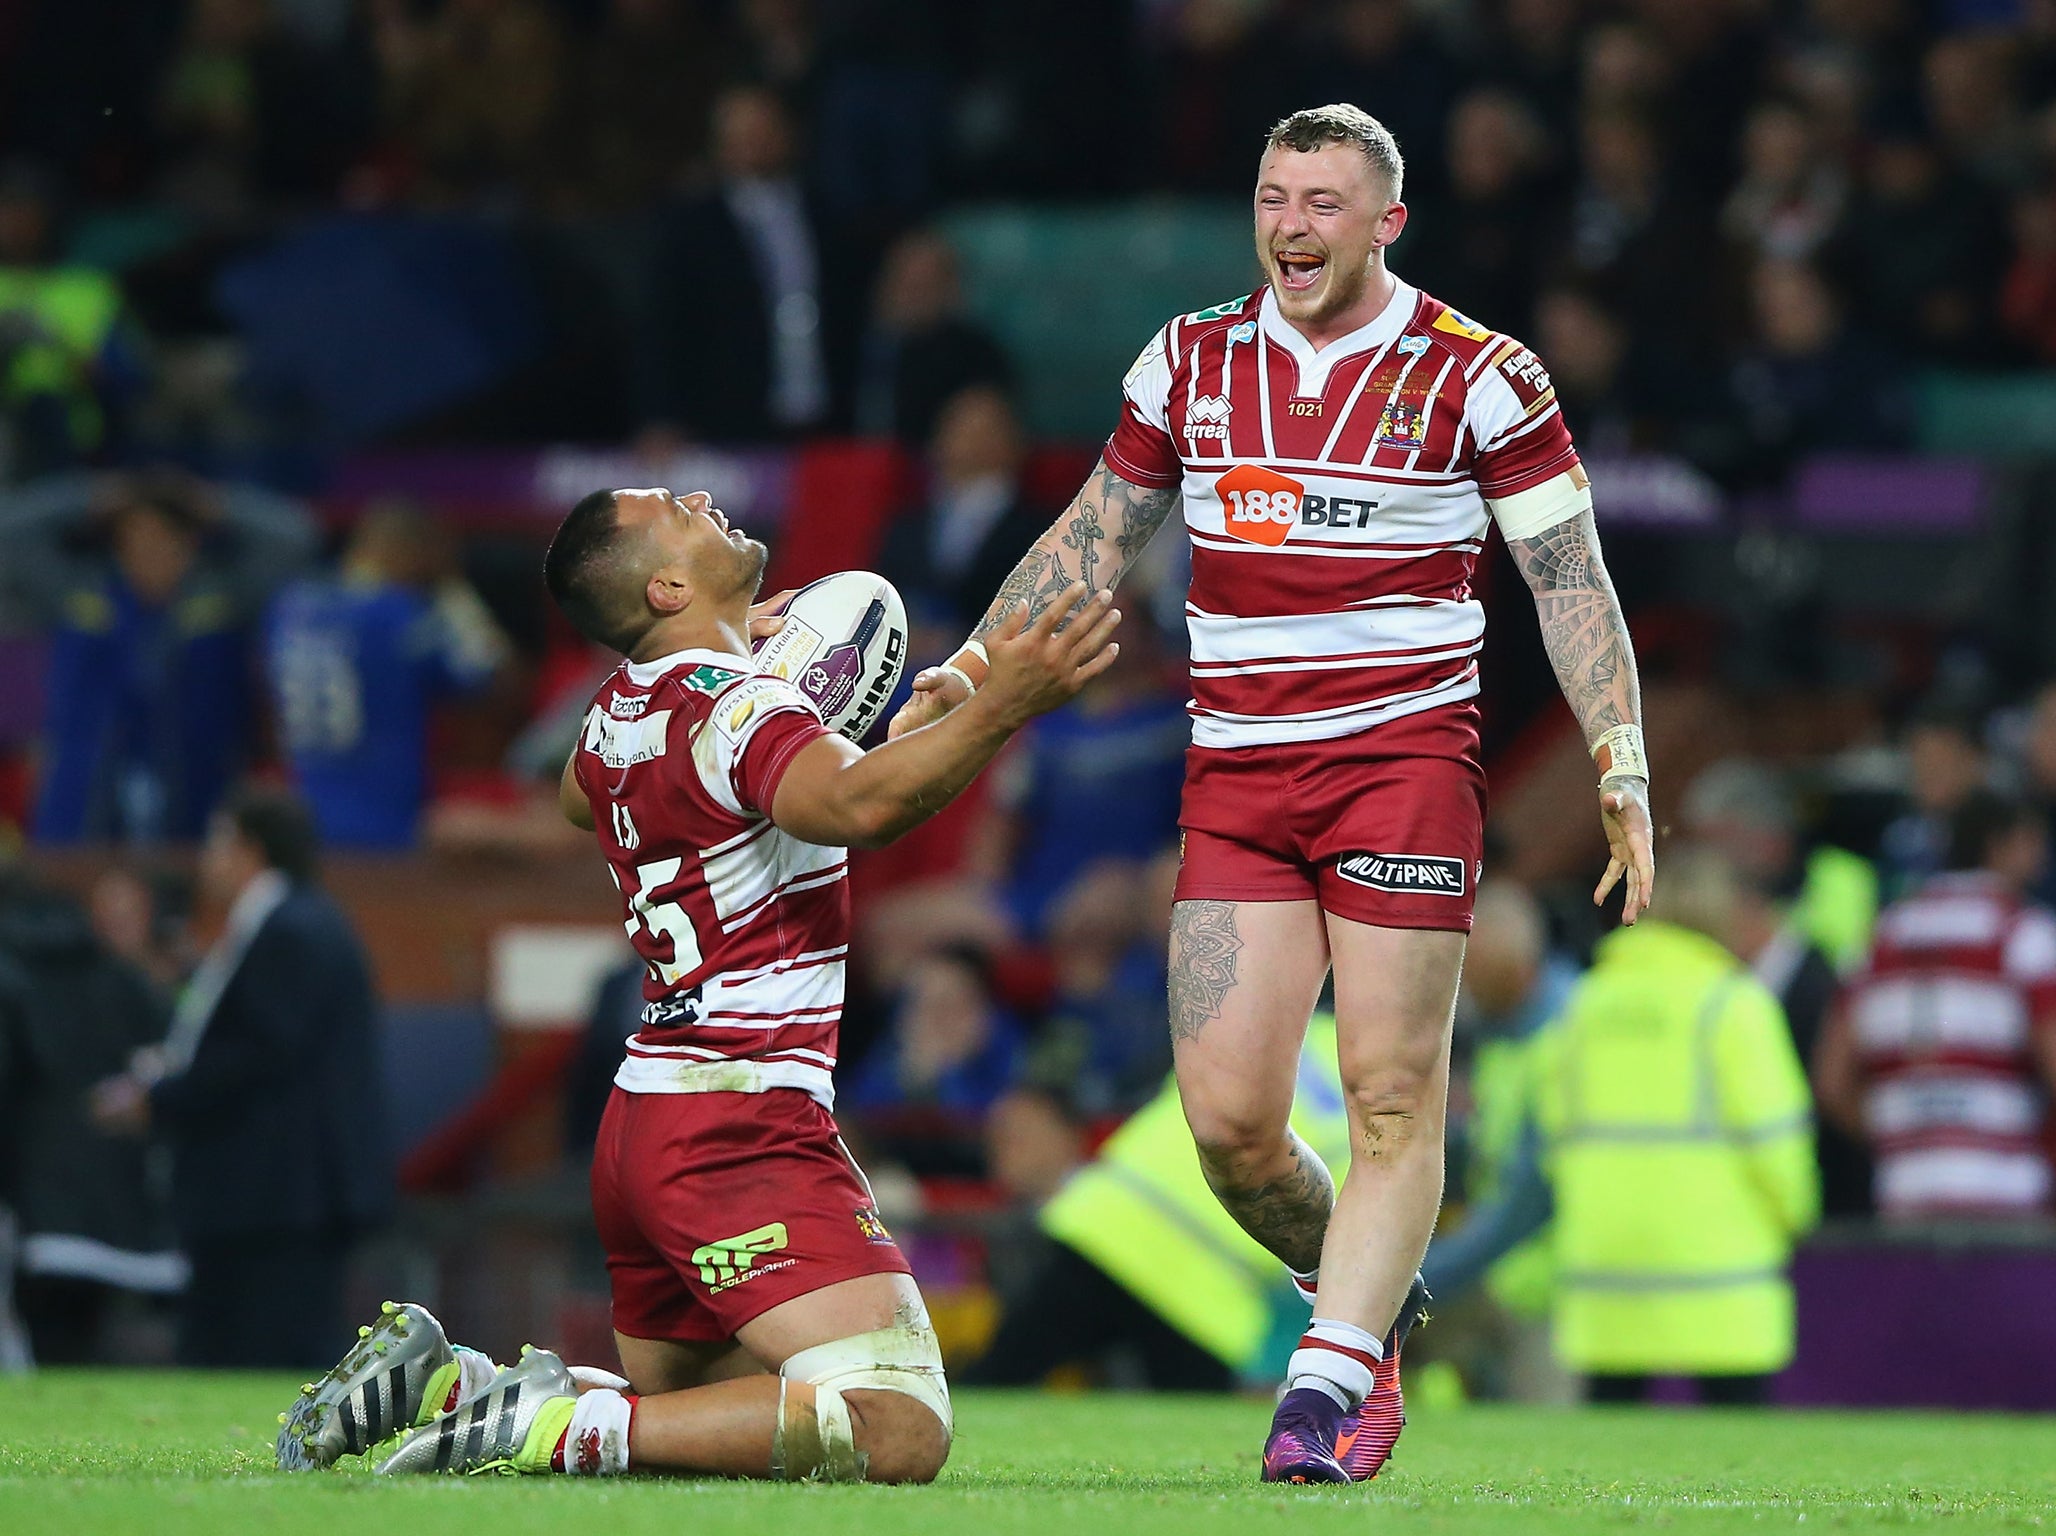 Josh Charnley is set to return to Wigan